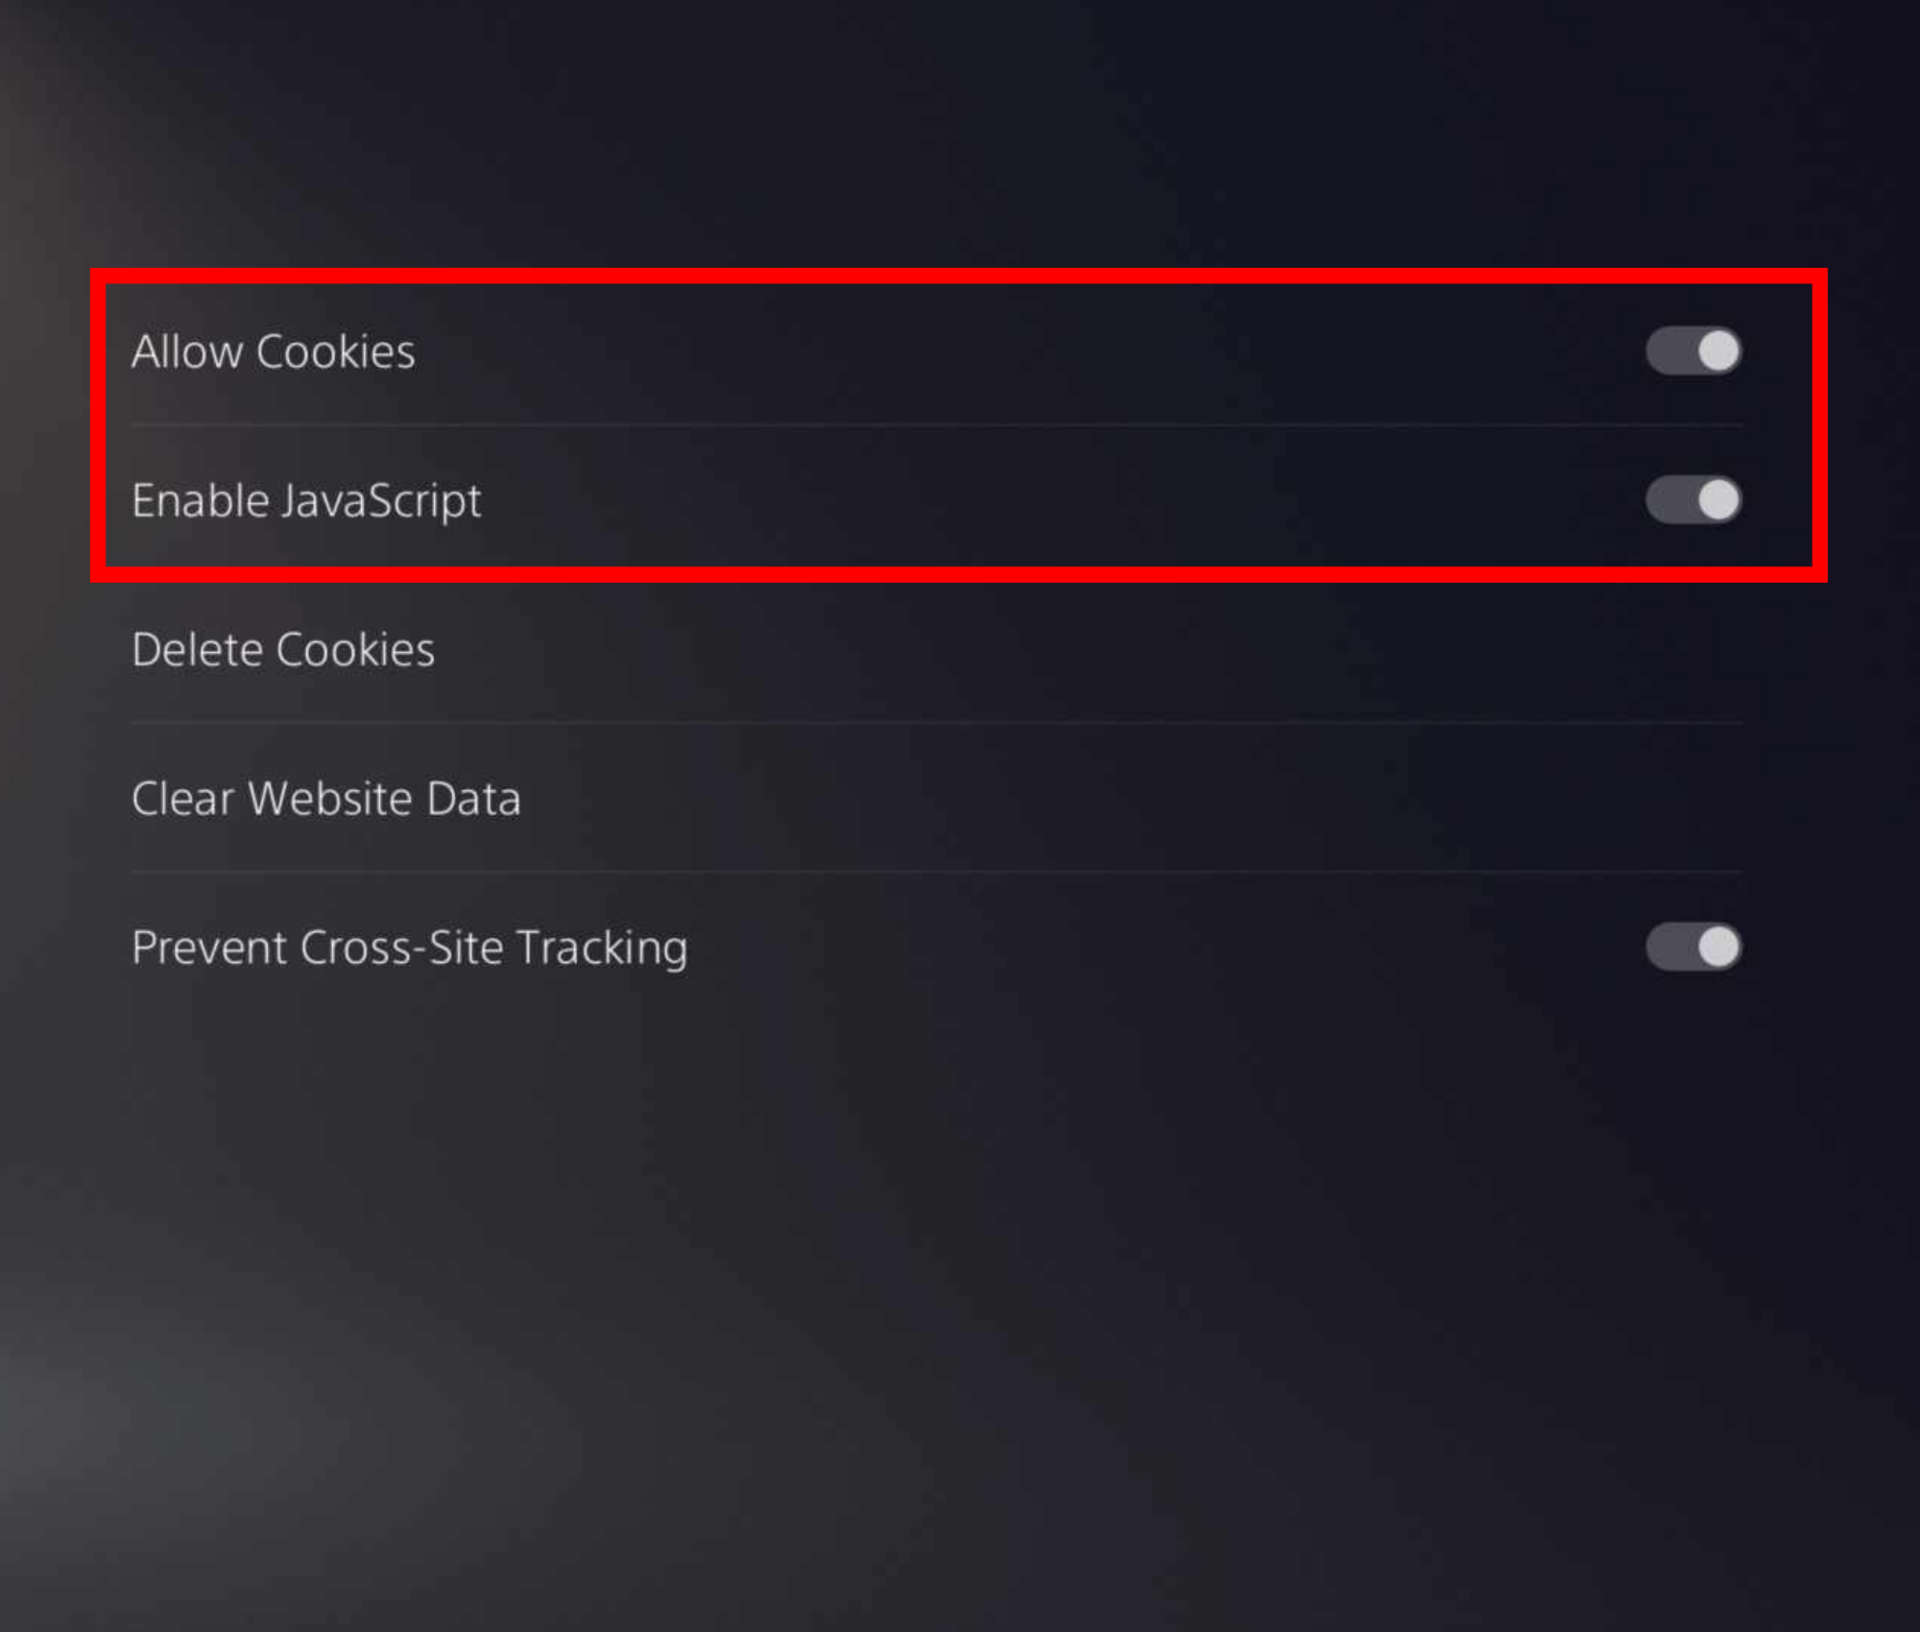 Playstation Allow Cookies and Enable JavaScript